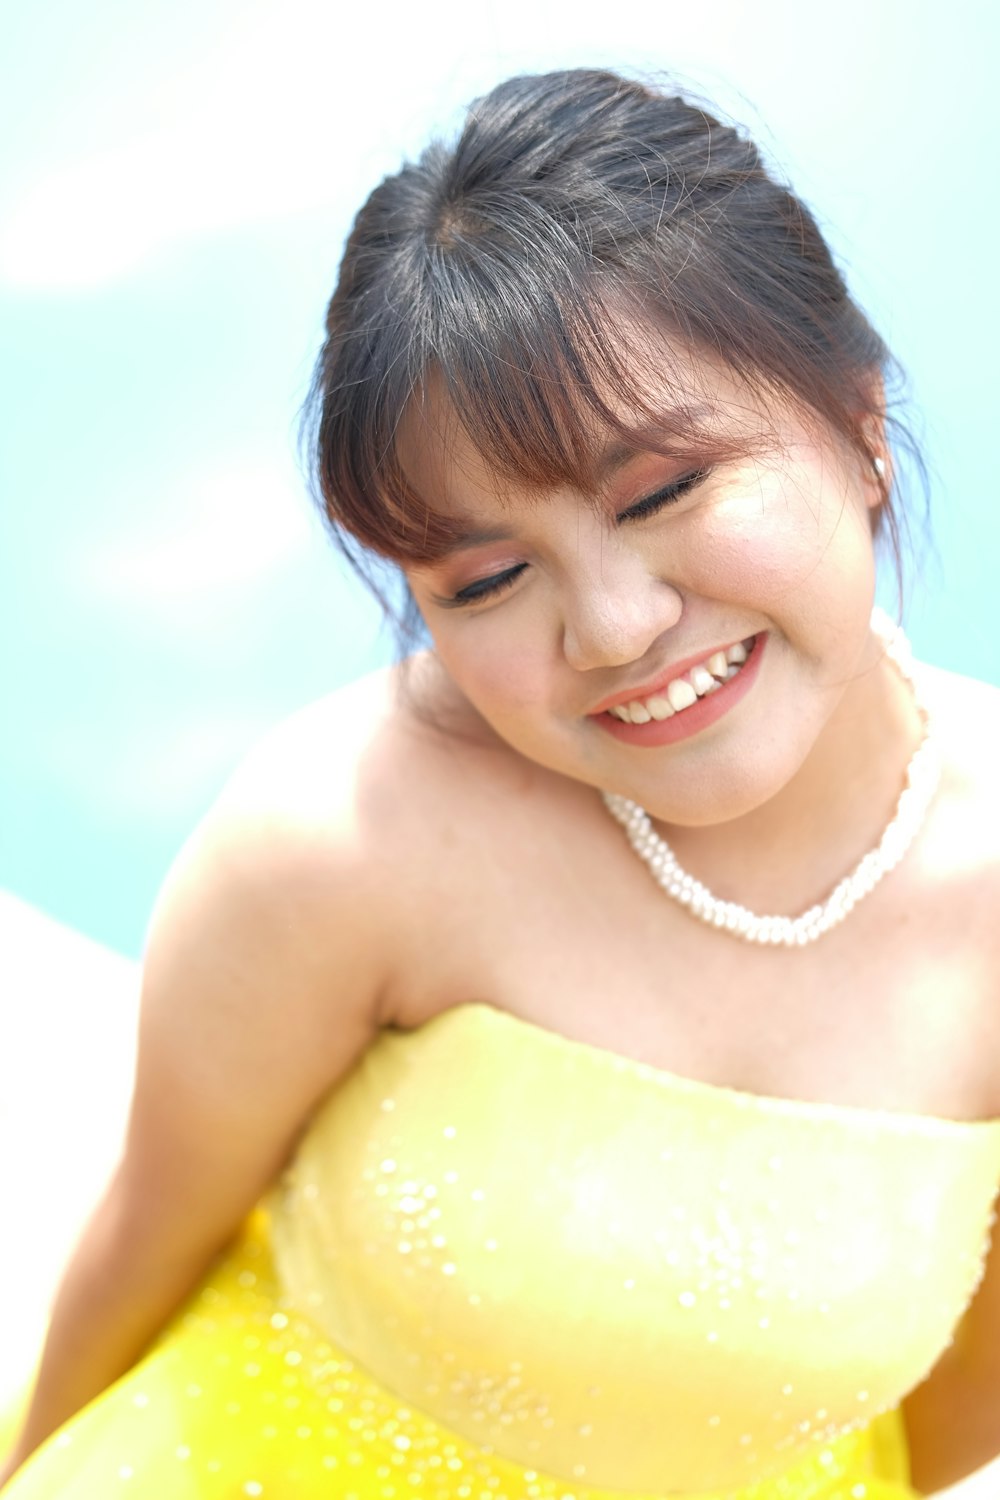 a person smiling and wearing a yellow dress